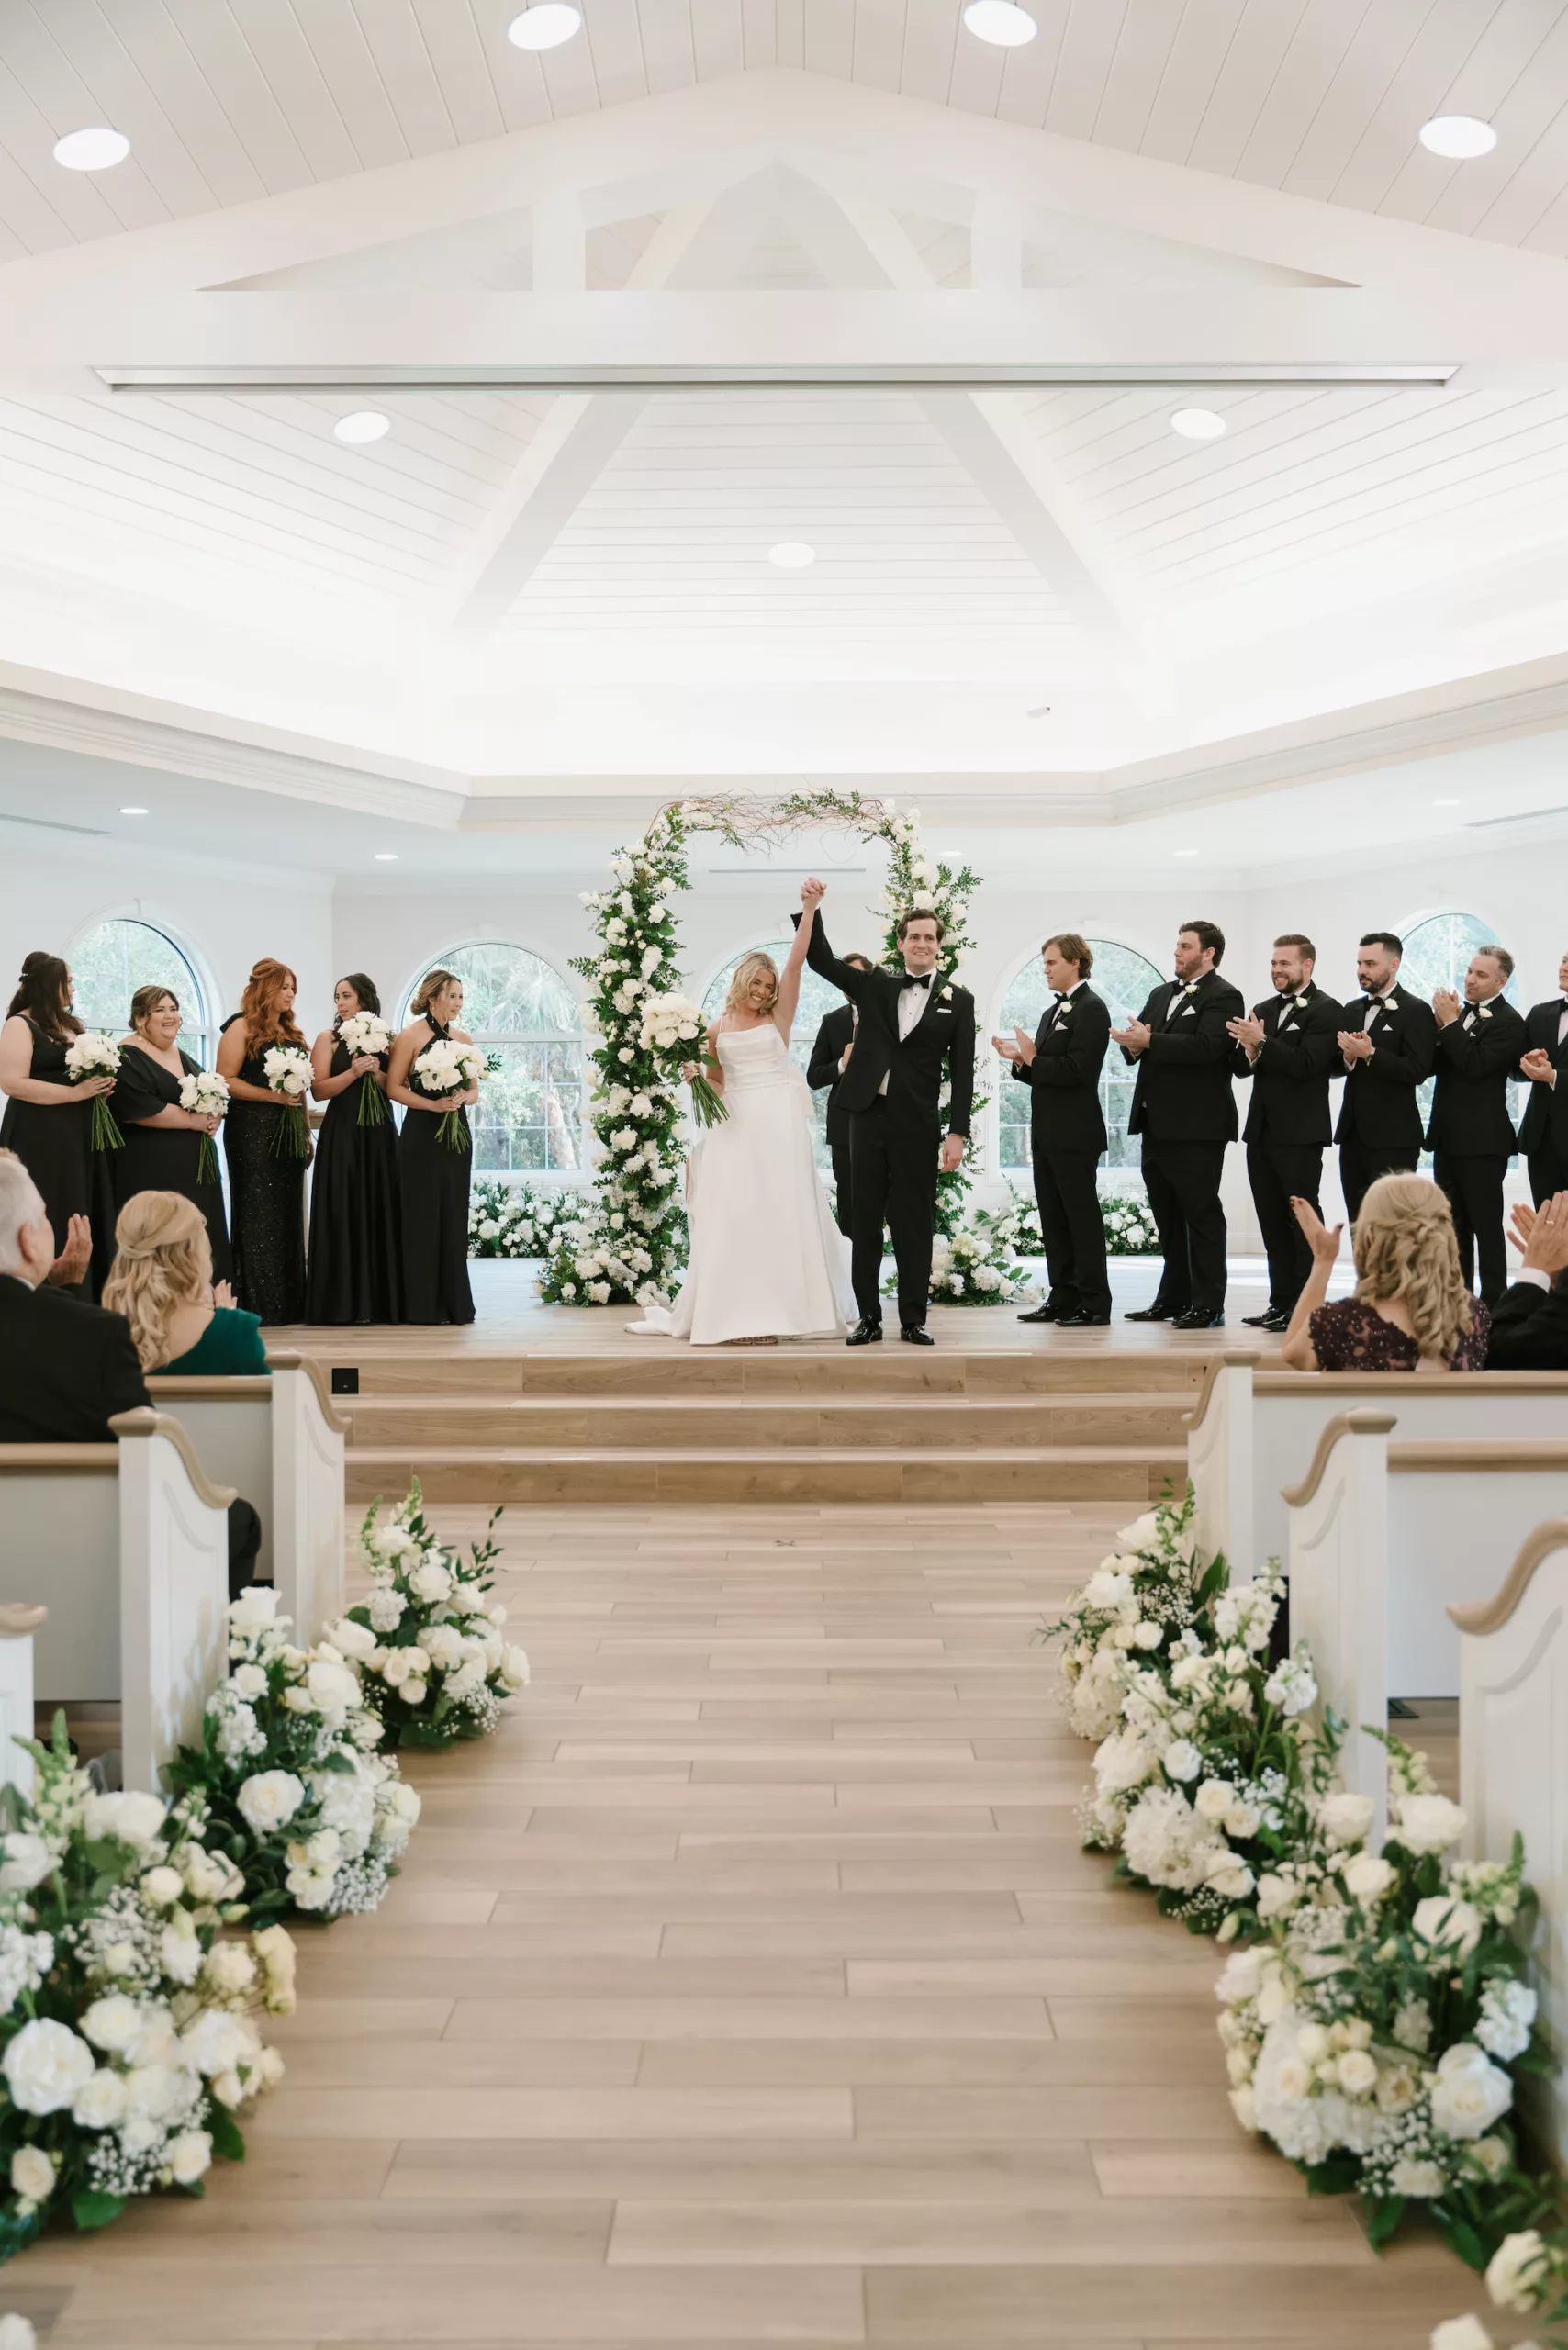 Bride and Groom Just Married Wedding Portrait | Classic Wedding Ceremony Aisle Decor Ideas | White Roses, Baby's Breath, Hydrangeas, and Greenery Flower Arrangements | Tampa Bay Event Venue Harborside Chapel